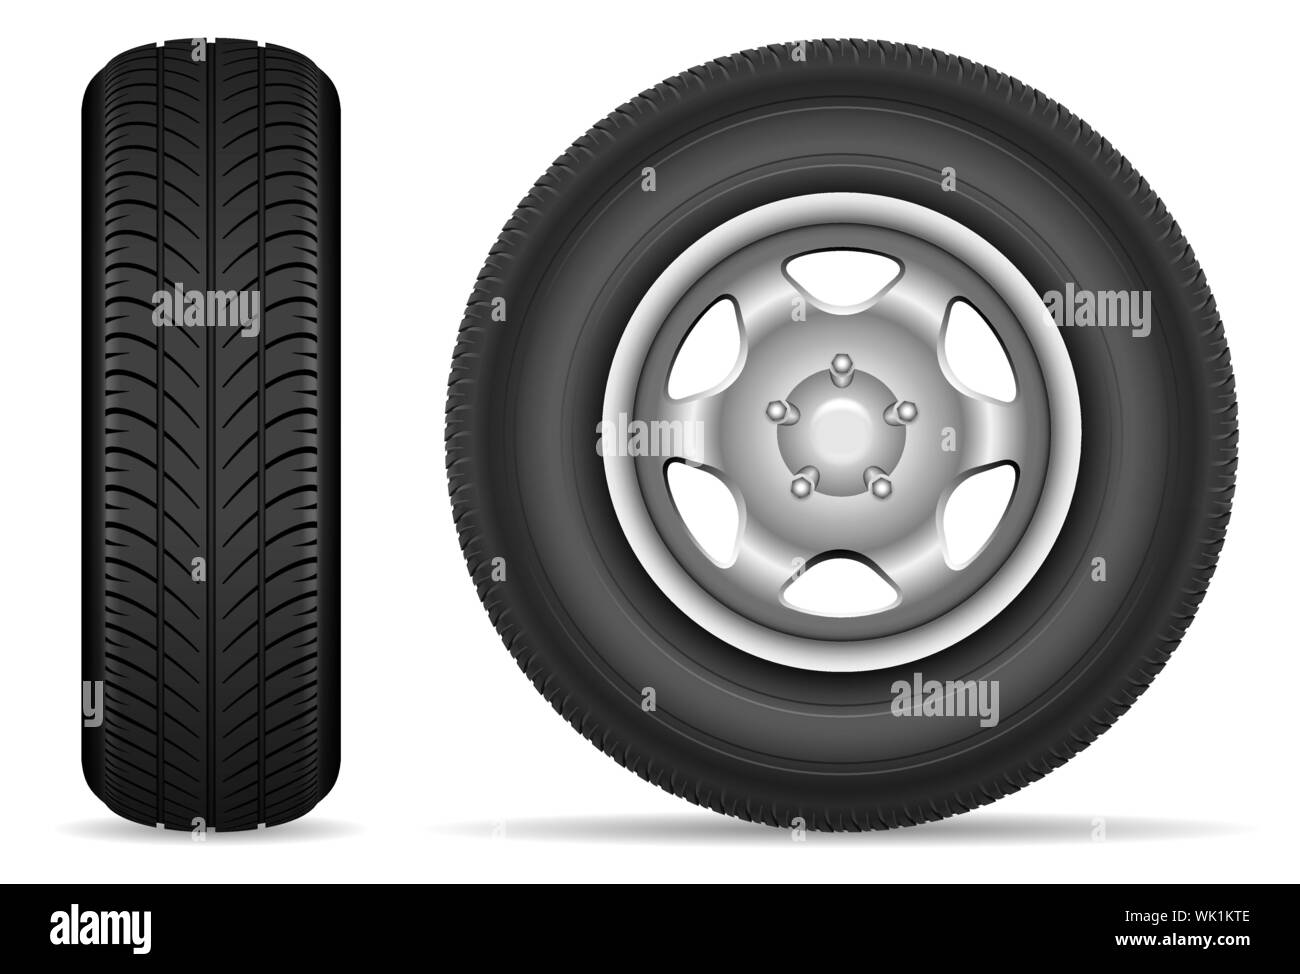 Car tires isolated on white background vector illustration Stock Vector